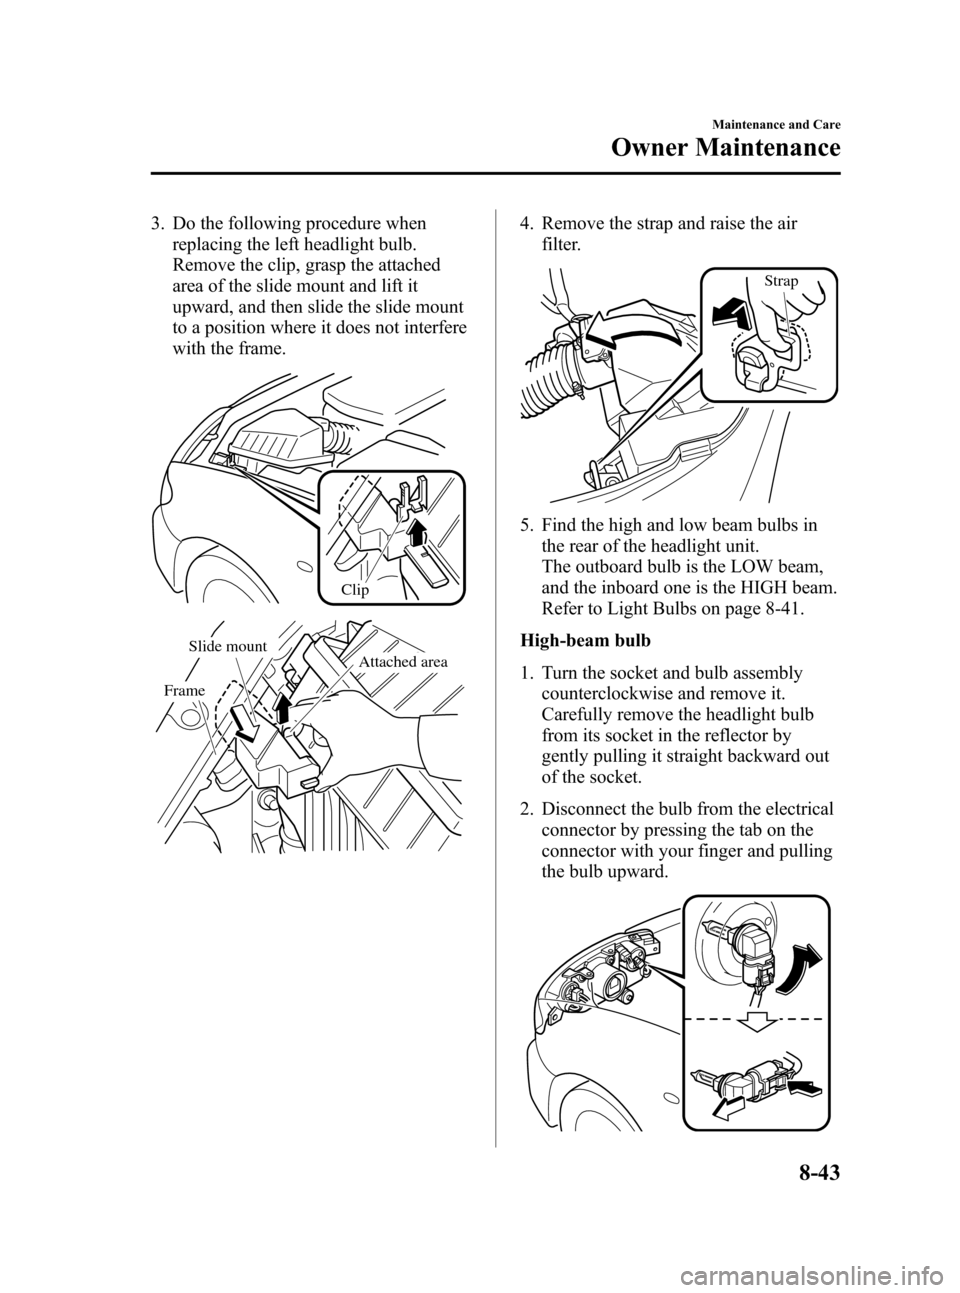 MAZDA MODEL 3 HATCHBACK 2007  Owners Manual (in English) Black plate (317,1)
3. Do the following procedure when
replacing the left headlight bulb.
Remove the clip, grasp the attached
area of the slide mount and lift it
upward, and then slide the slide mount